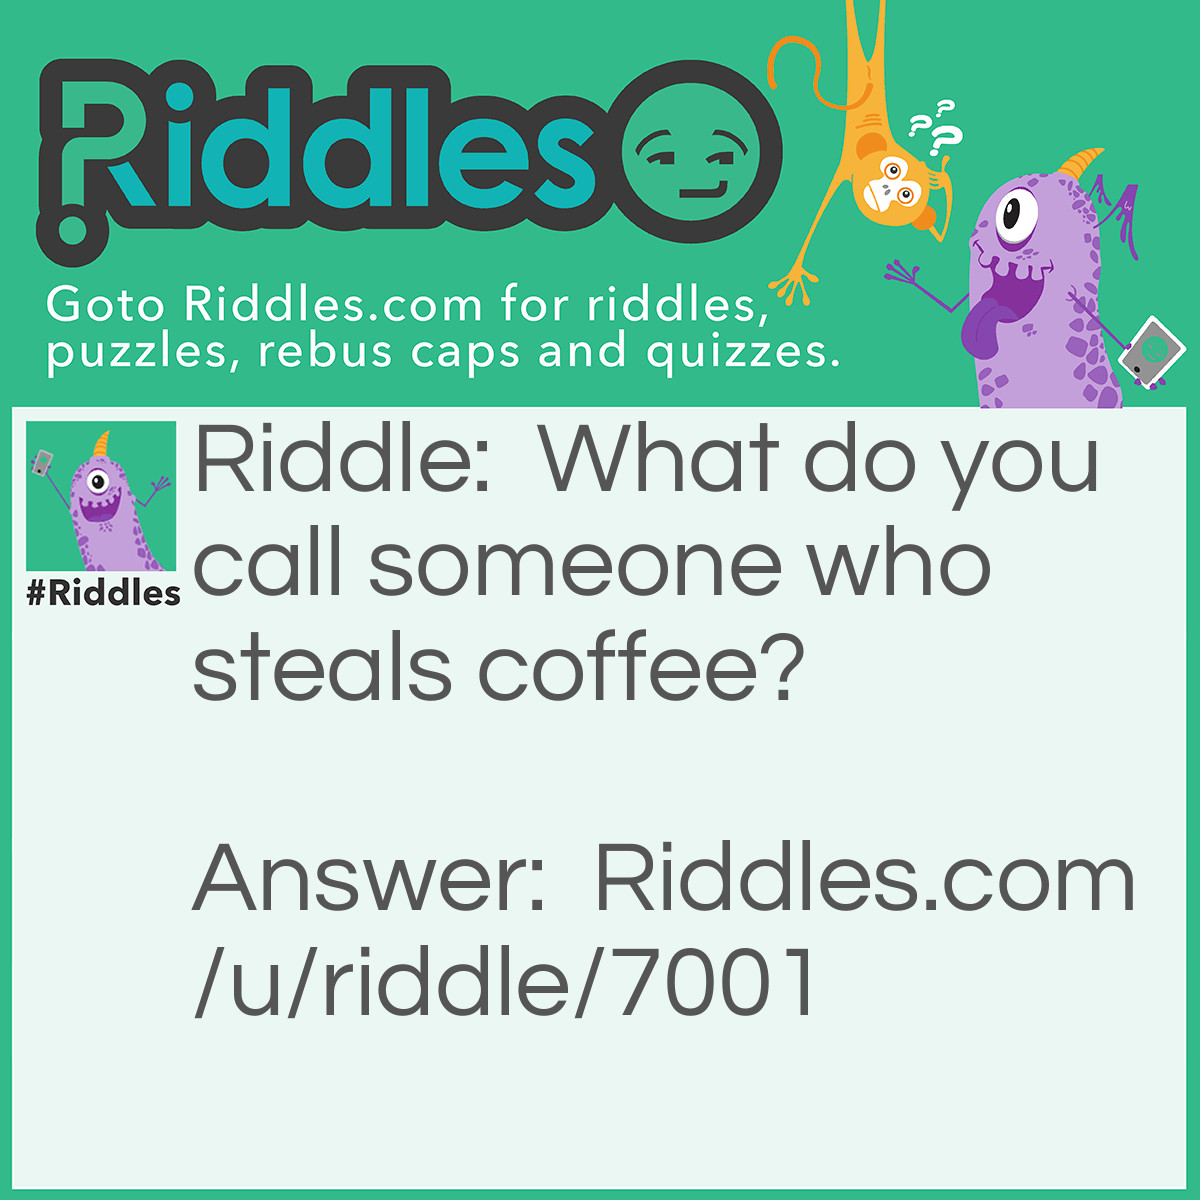 Riddle: What do you call someone who steals coffee? Answer: A "mug".